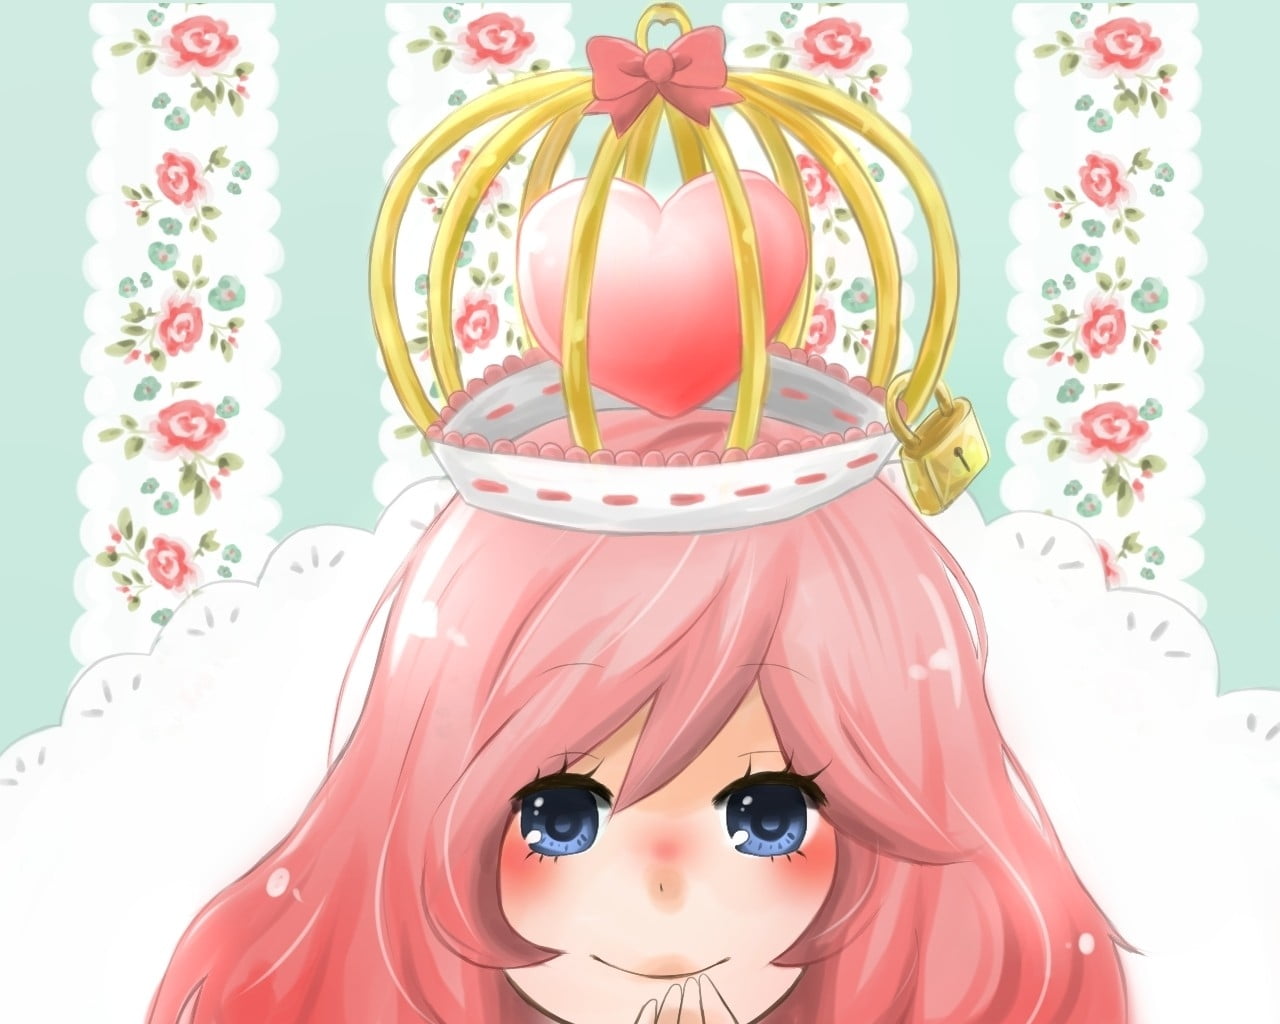 anime girl with pink hair and crown